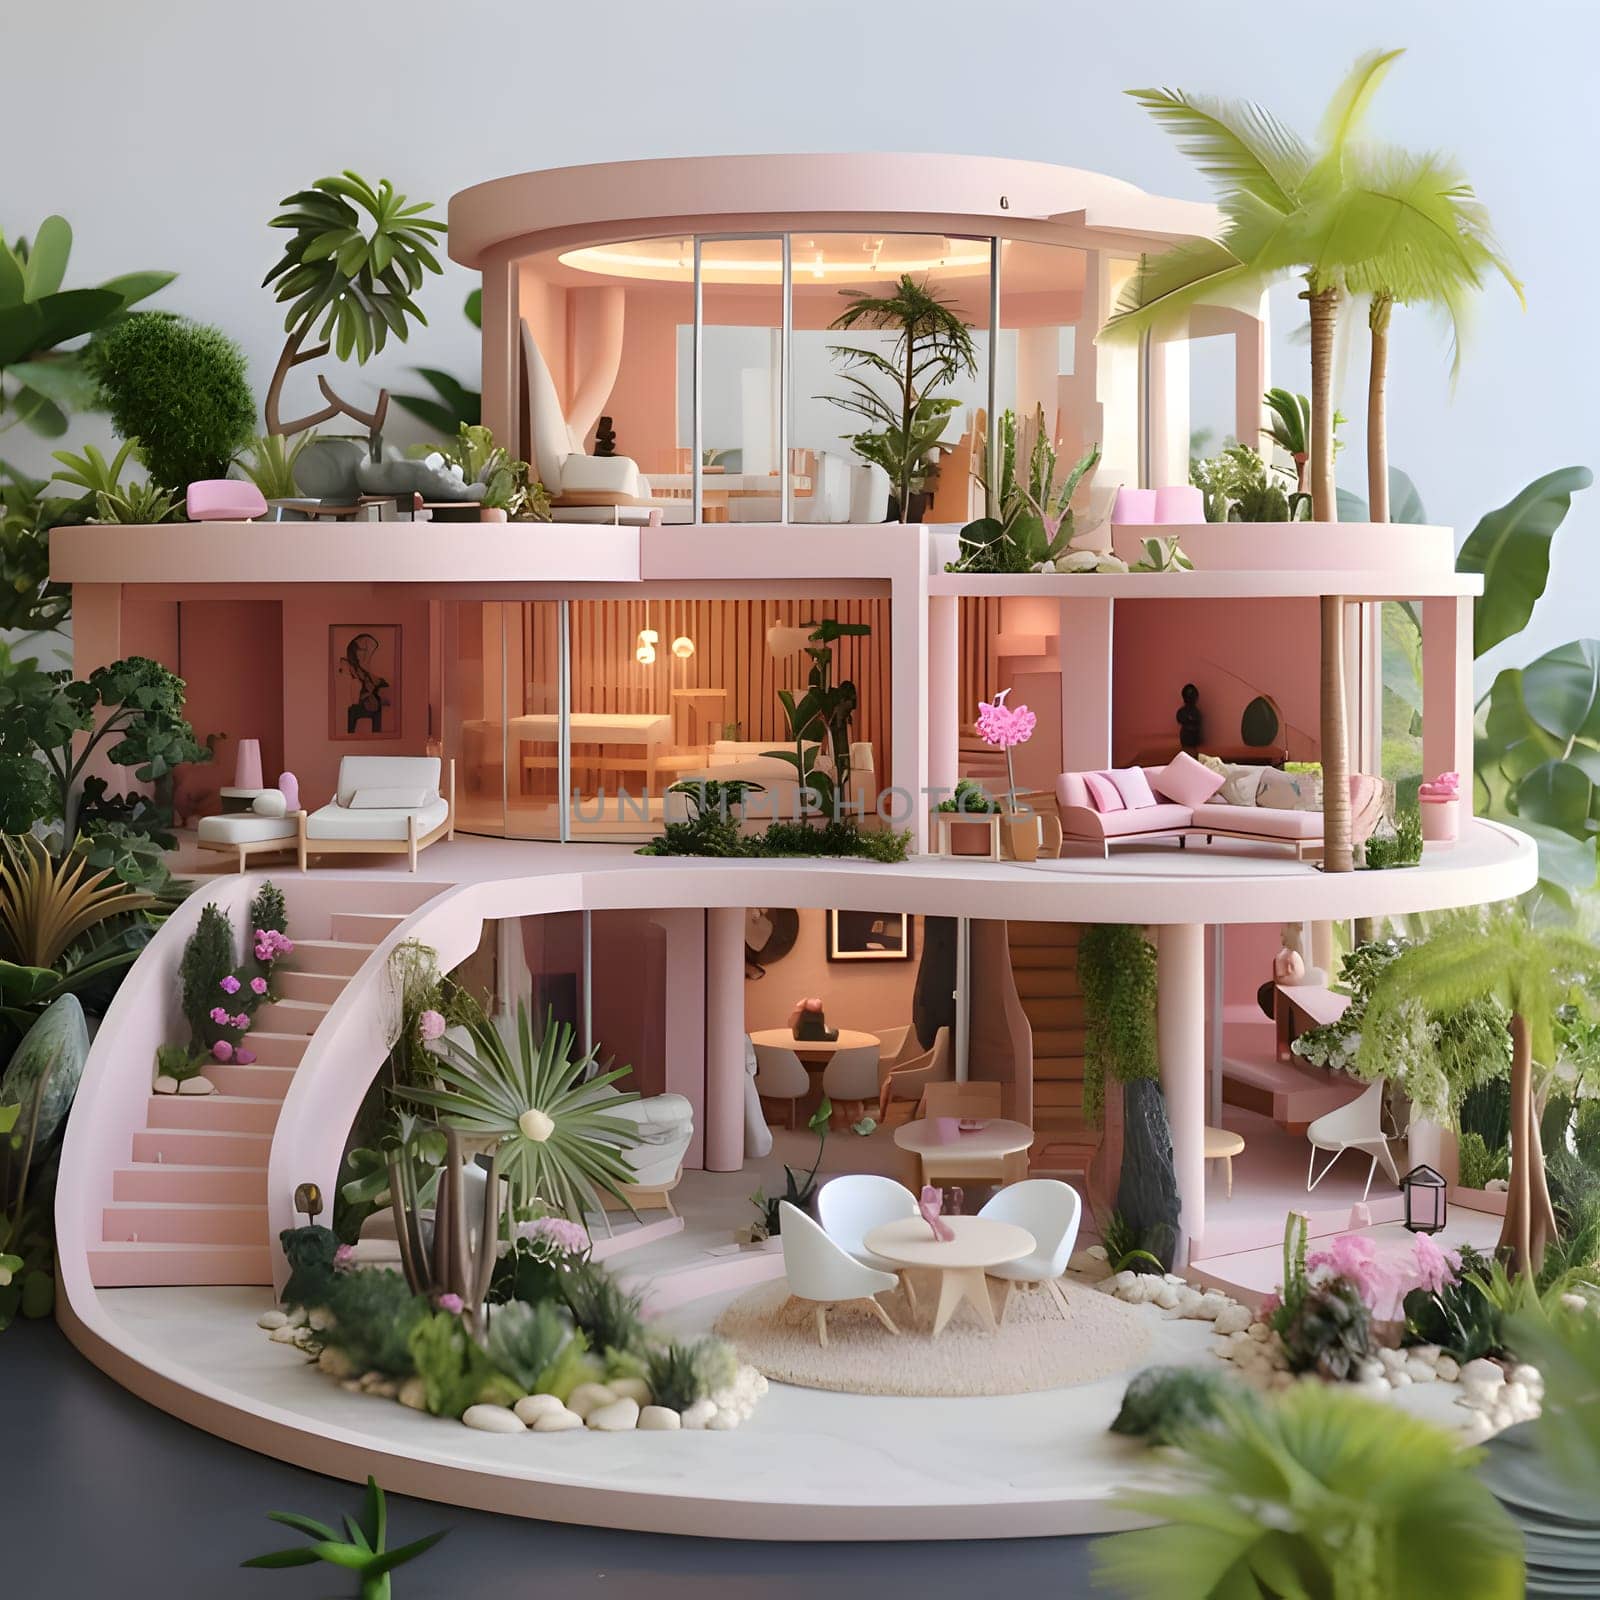 Luxury pink mansion in barbie style. by ThemesS